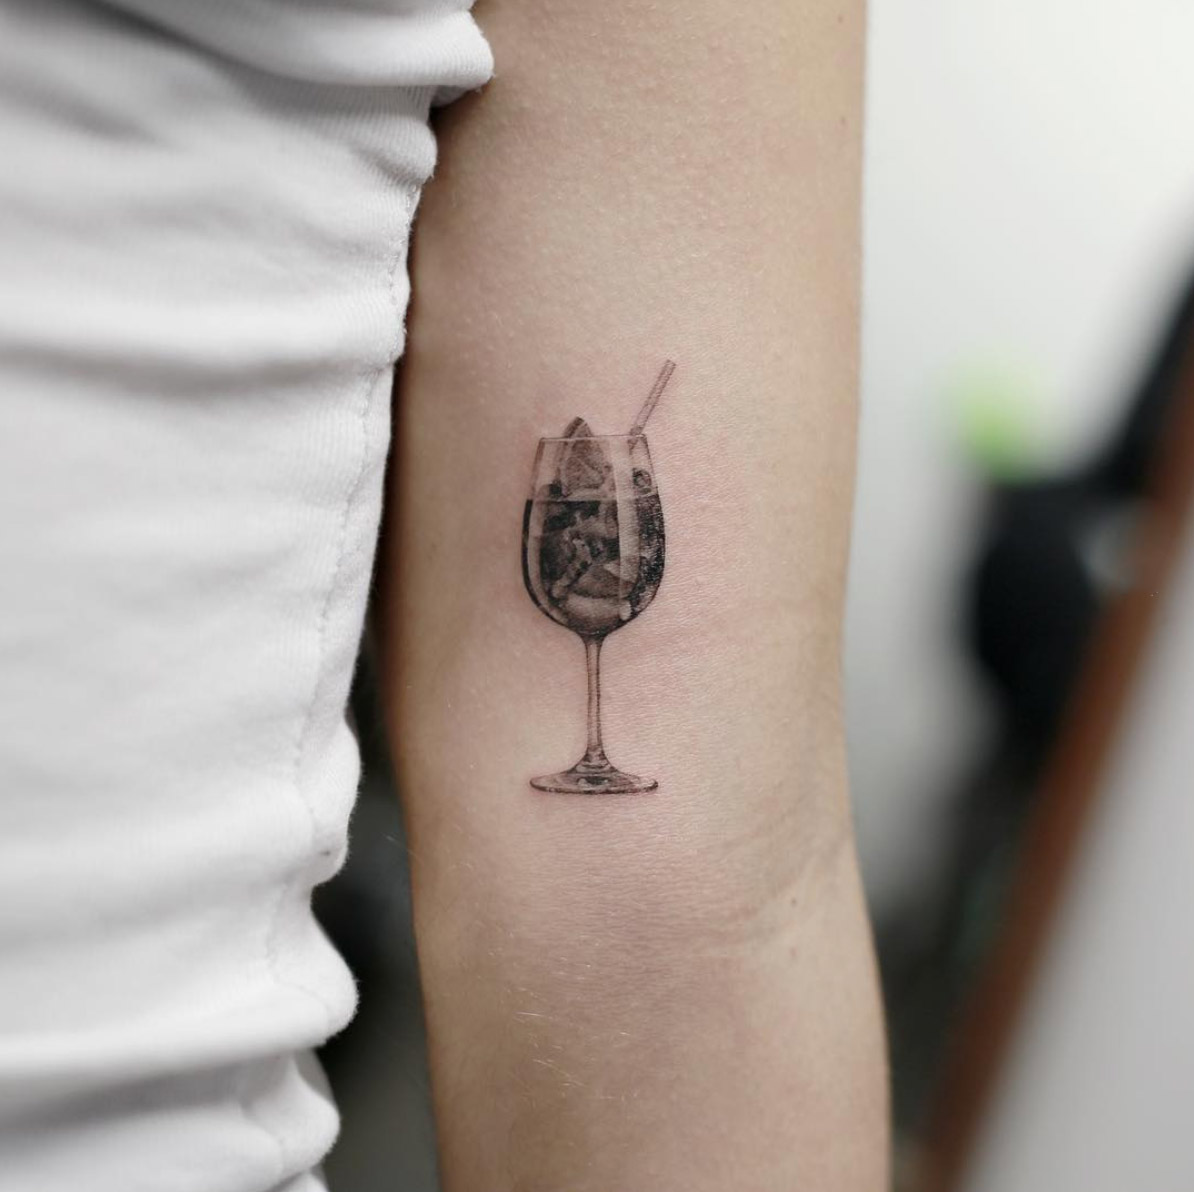 40 Perfect Tattoos of Everyday Objects - TattooBlend